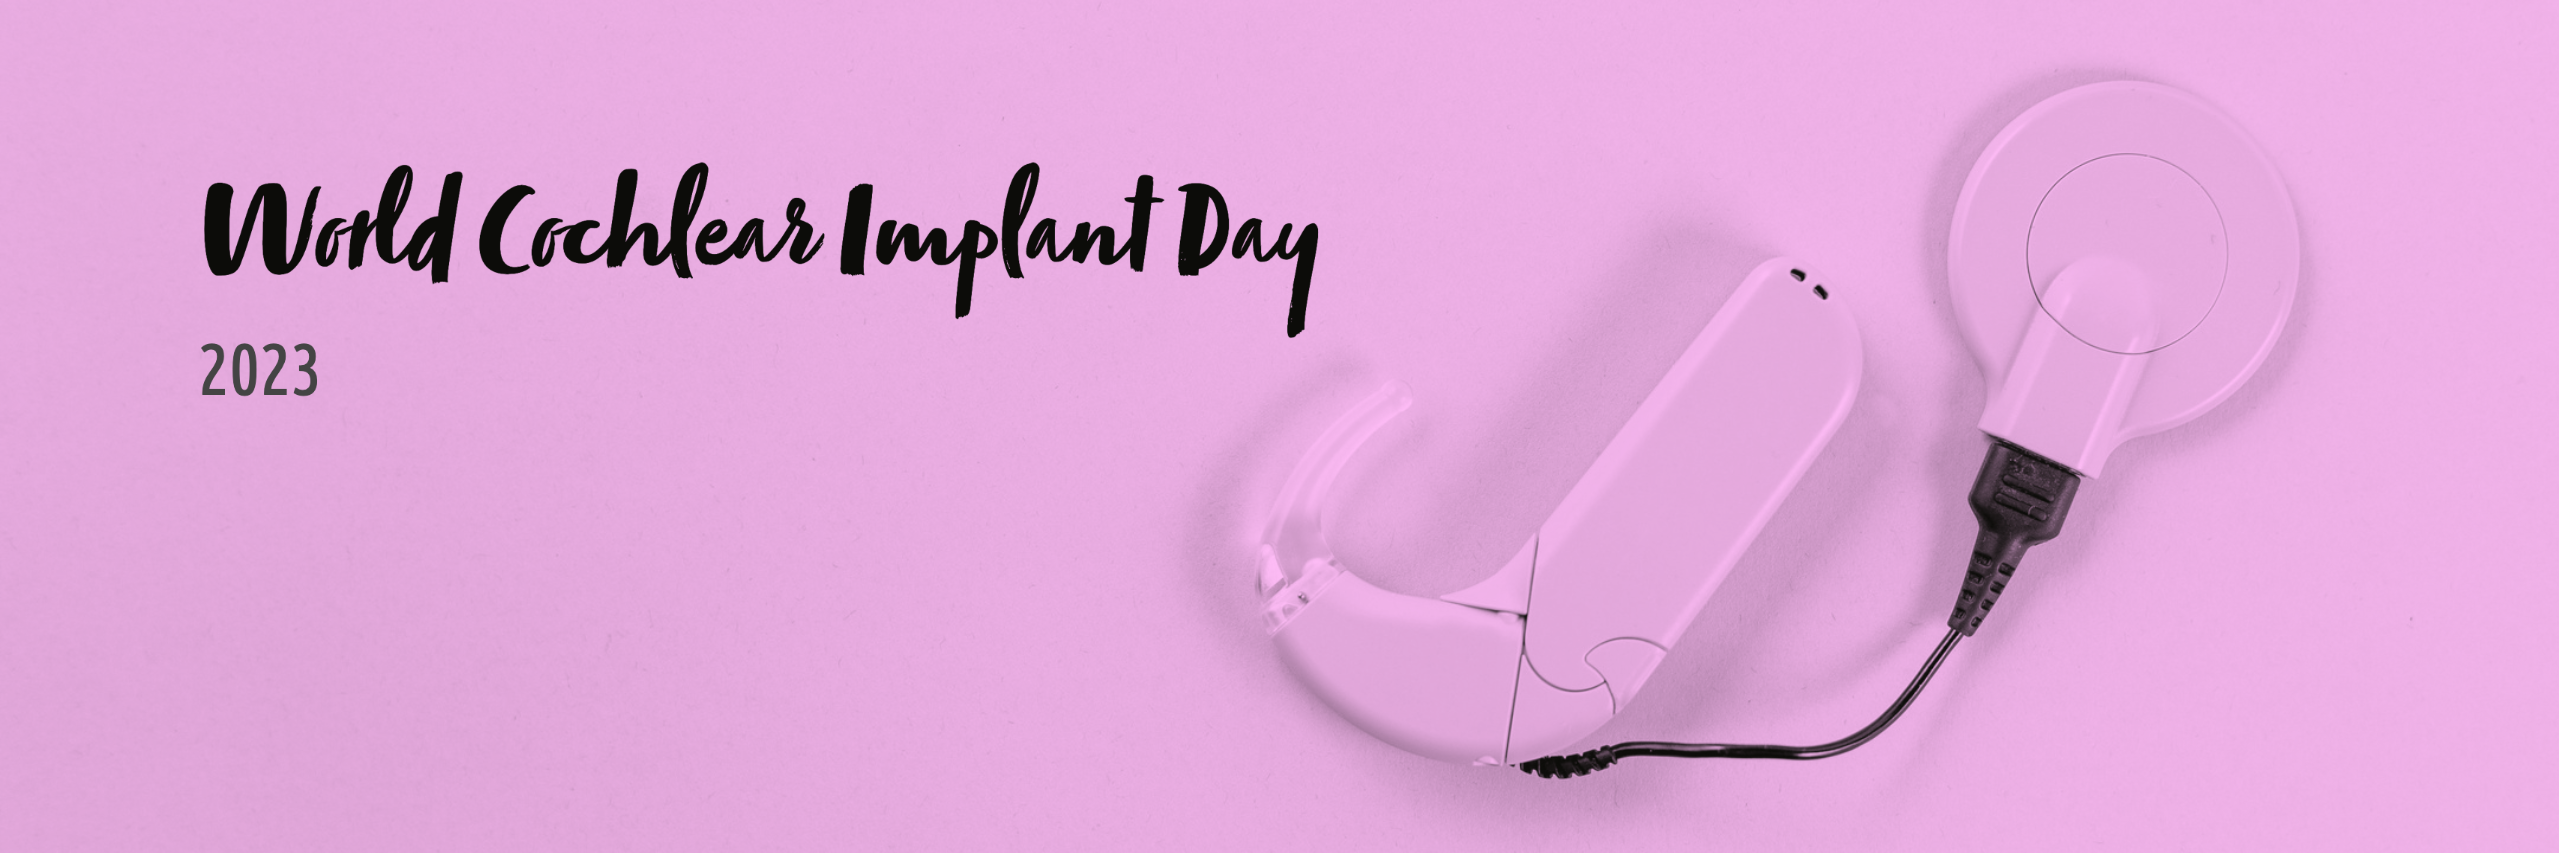 World Cochlear Implant Day 2023 – A User’s Perspective